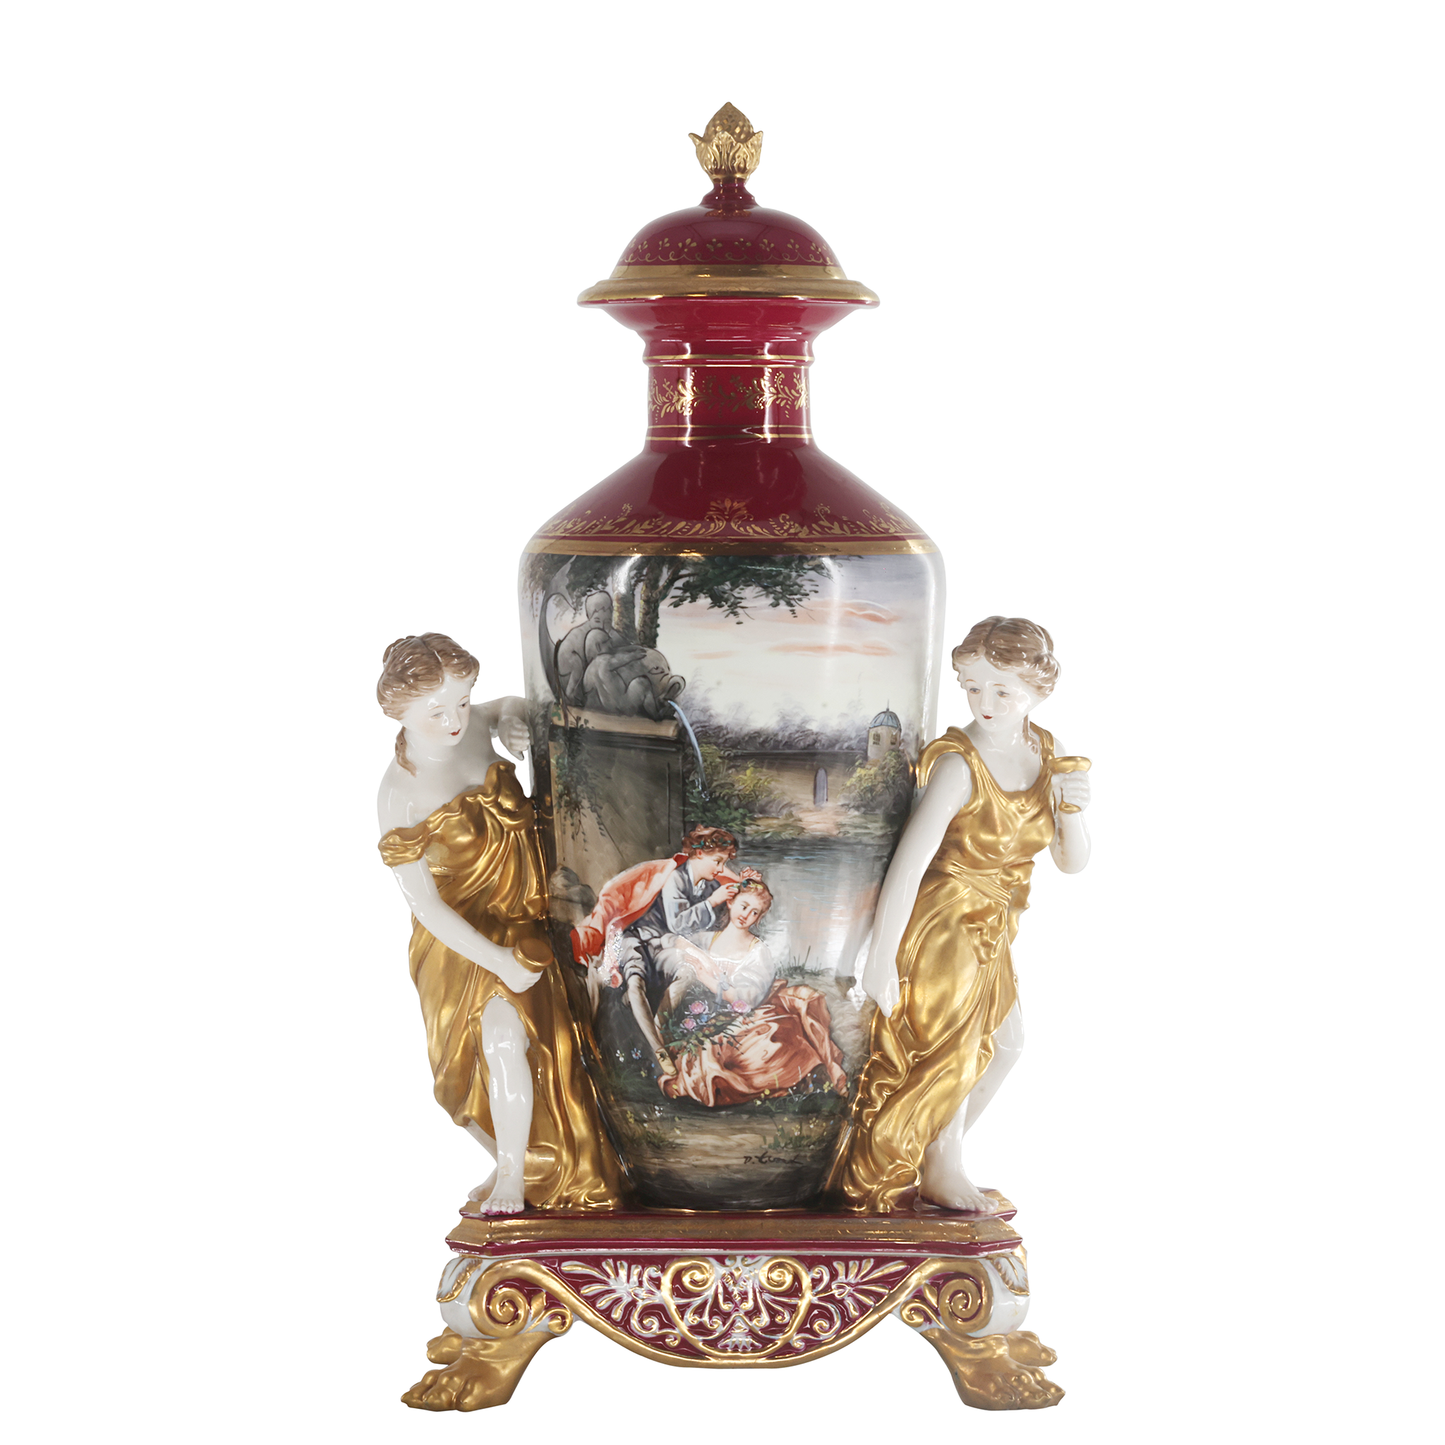 Two Muses Rococo Urn